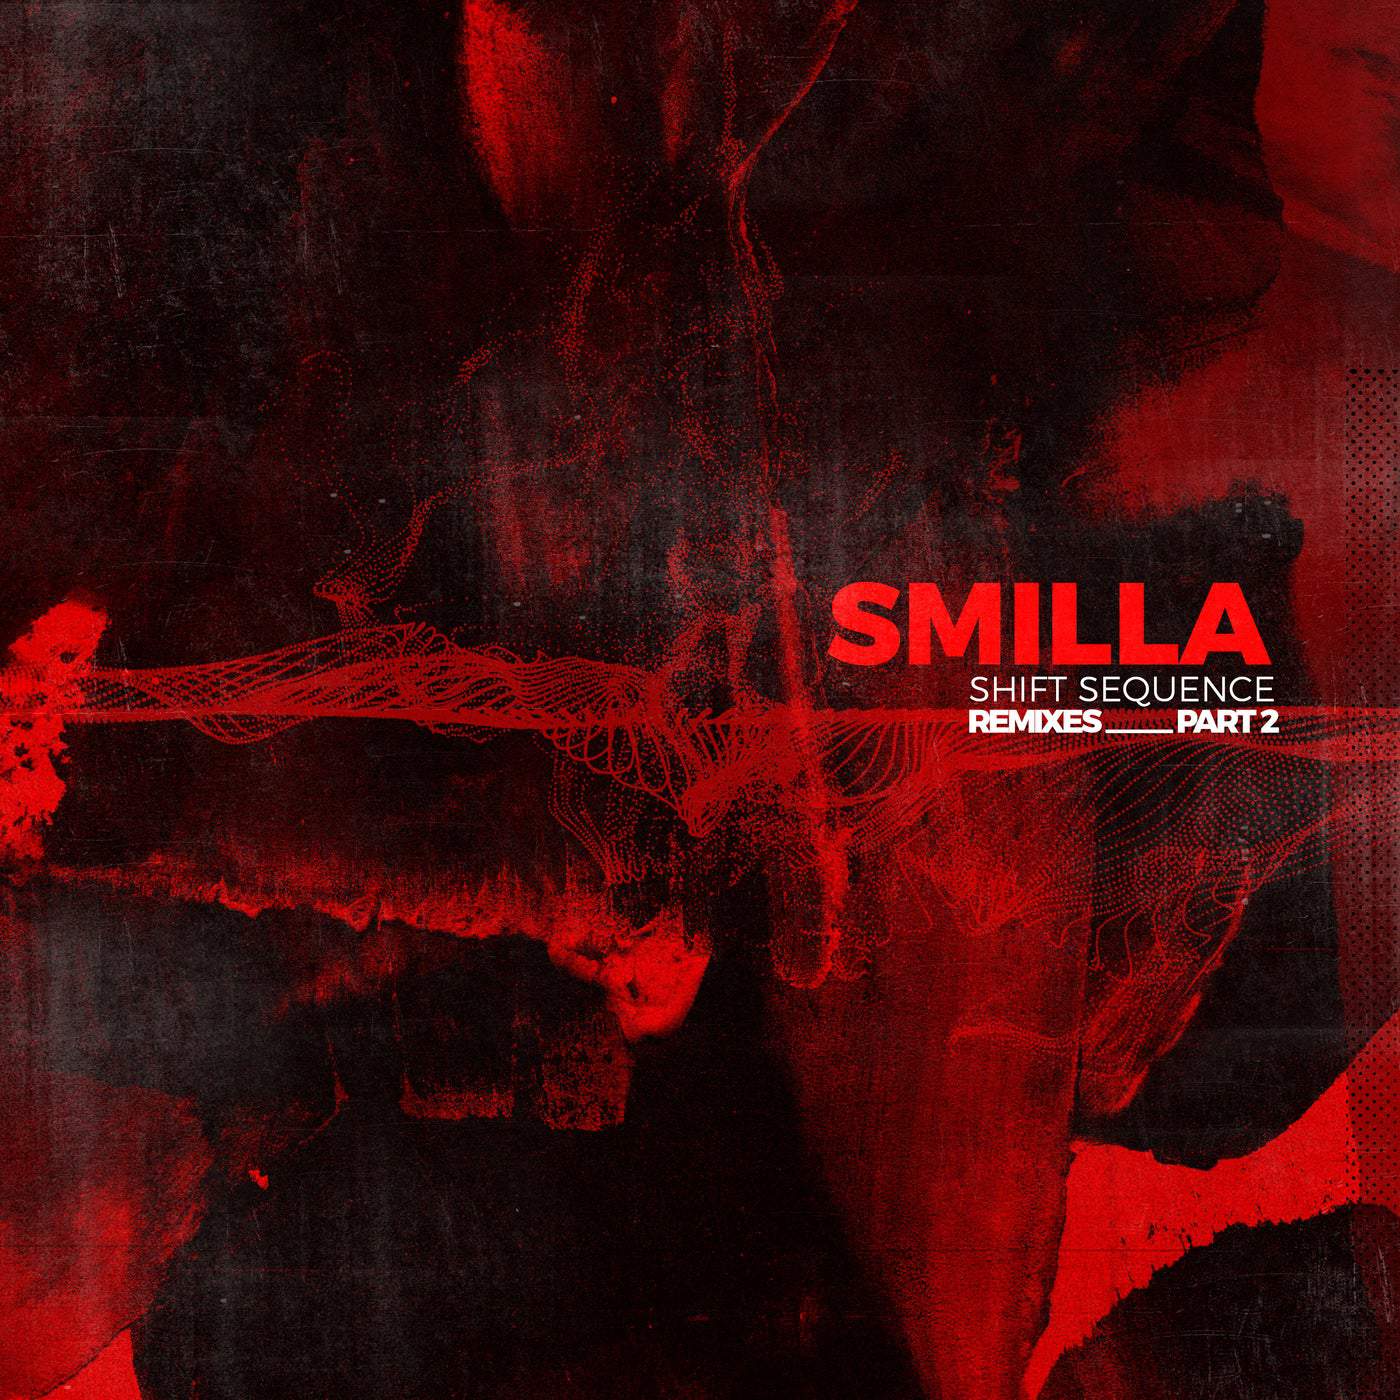 image cover: Smilla - Shift Sequence Remixes Part 2 / HHBER036B